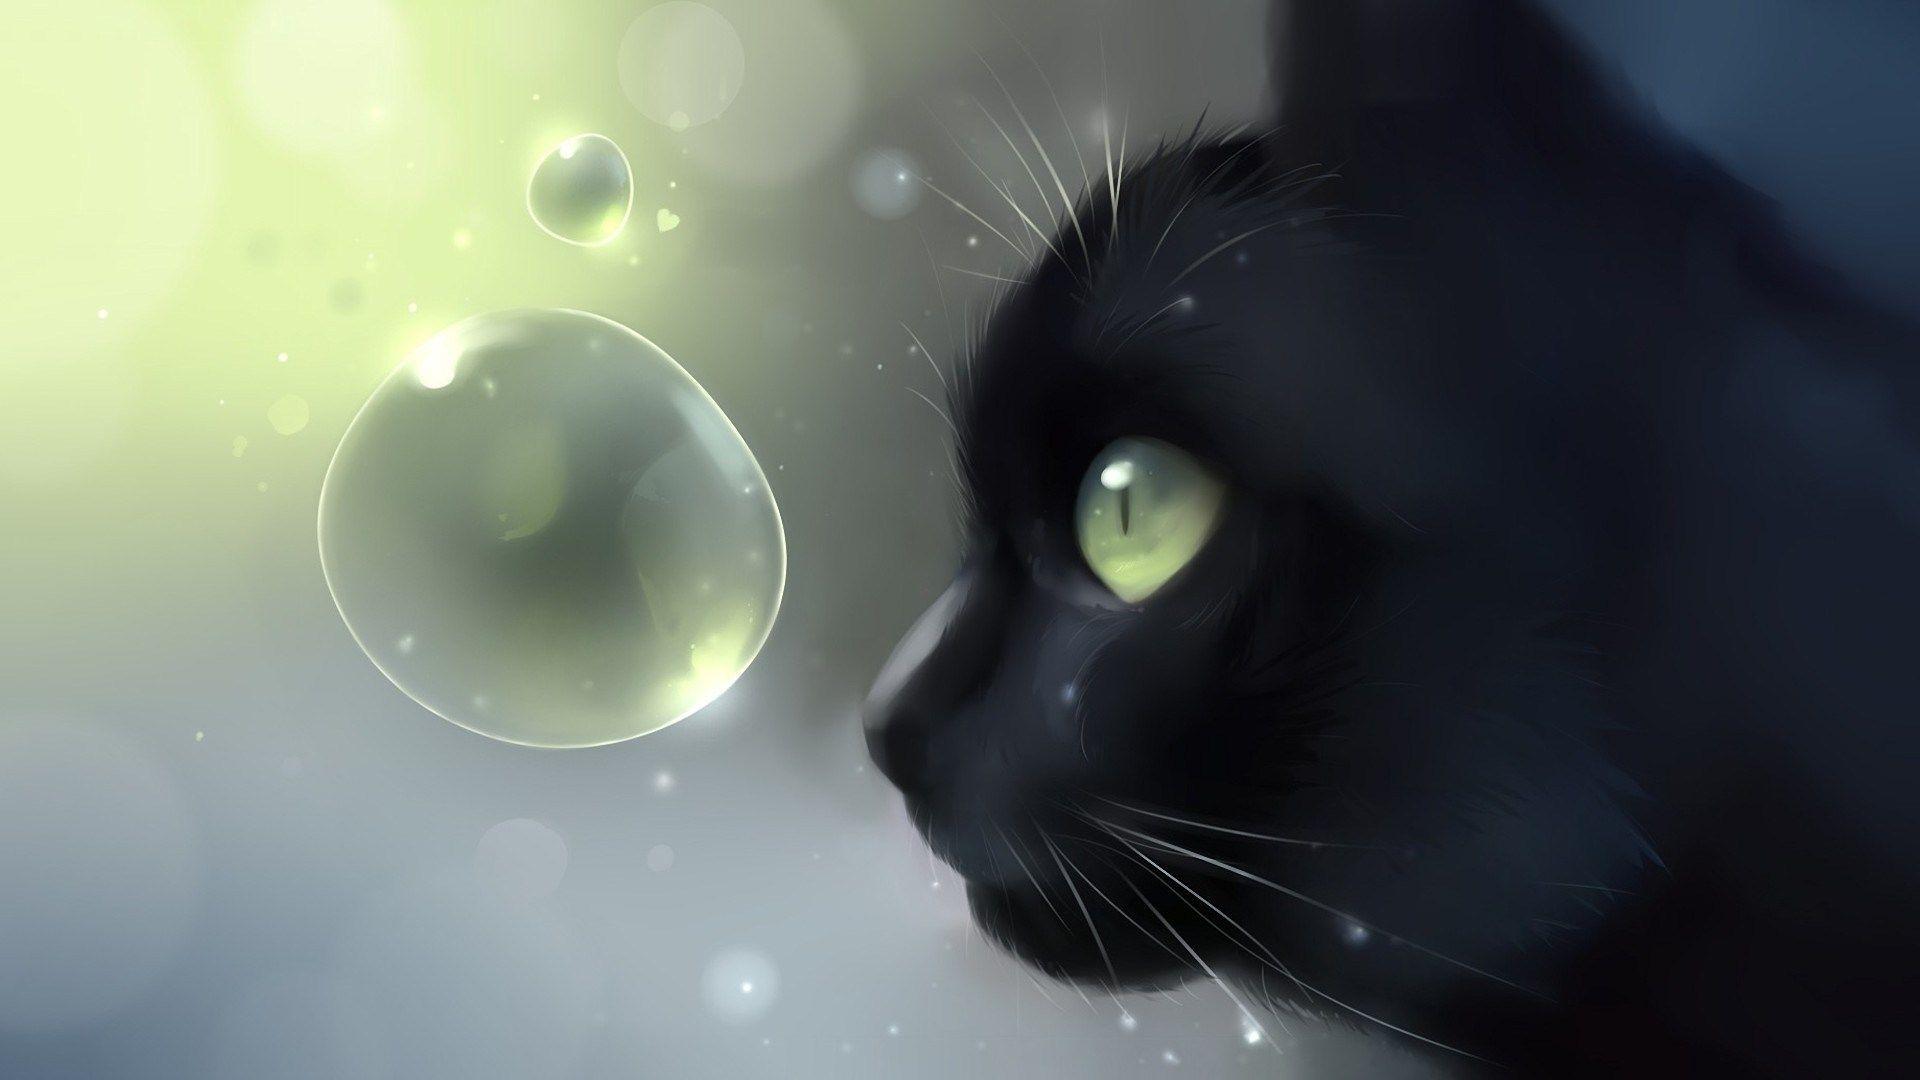 Anime Cat Wallpapers Top H Nh Nh P